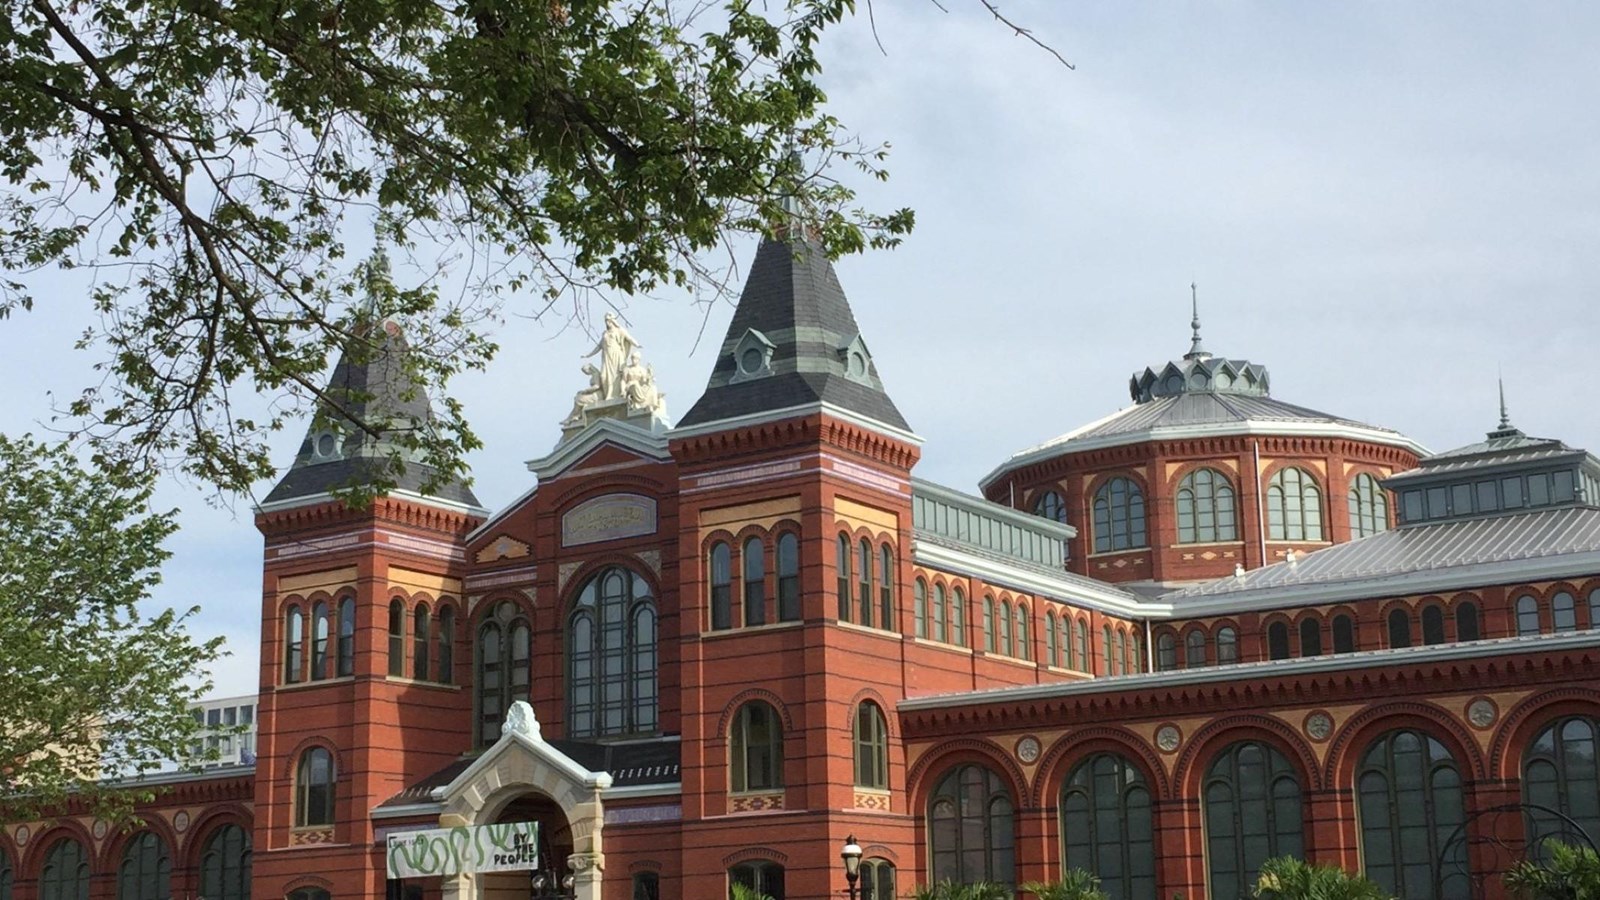 Front entrance of a red brick building with two pointed towers and a central metal rotunda.